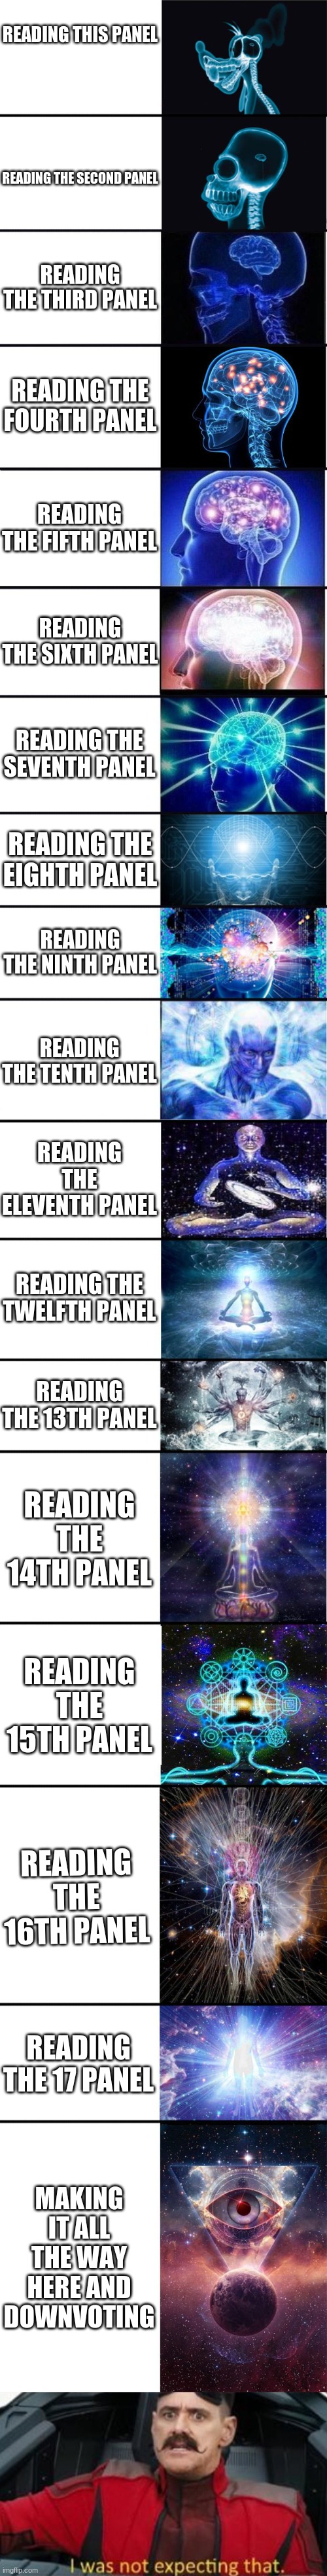 can u downvote this please | READING THIS PANEL; READING THE SECOND PANEL; READING THE THIRD PANEL; READING THE FOURTH PANEL; READING THE FIFTH PANEL; READING THE SIXTH PANEL; READING THE SEVENTH PANEL; READING THE EIGHTH PANEL; READING THE NINTH PANEL; READING THE TENTH PANEL; READING THE ELEVENTH PANEL; READING THE TWELFTH PANEL; READING THE 13TH PANEL; READING THE 14TH PANEL; READING THE 15TH PANEL; READING THE 16TH PANEL; READING THE 17 PANEL; MAKING IT ALL THE WAY HERE AND DOWNVOTING | image tagged in expanding brain 9001 | made w/ Imgflip meme maker